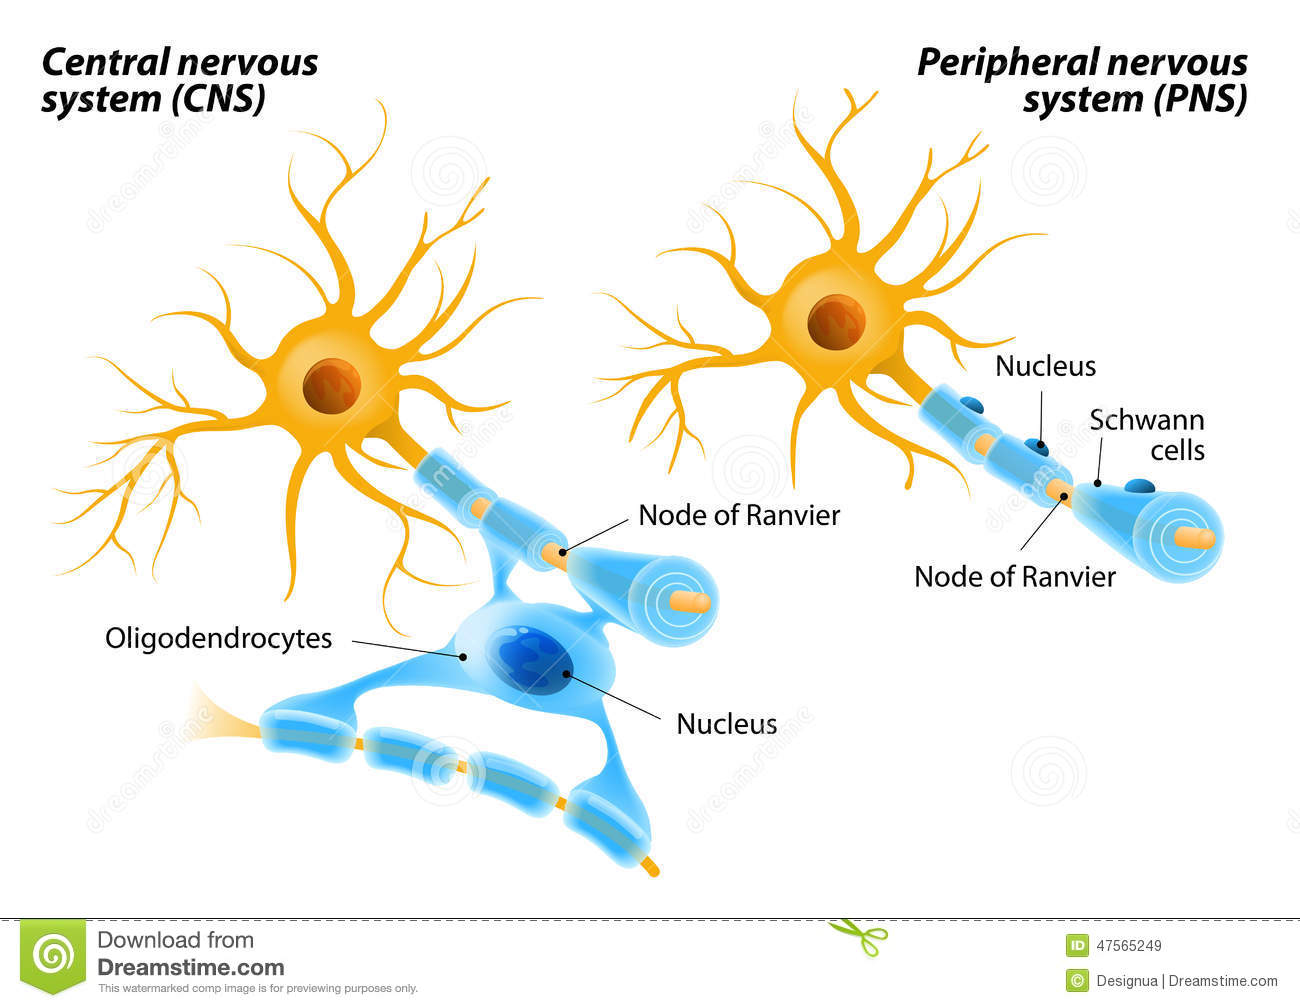 How Does The Myelination Process Differ In The Central Nervous System And The Peripheral Nervous System Socratic